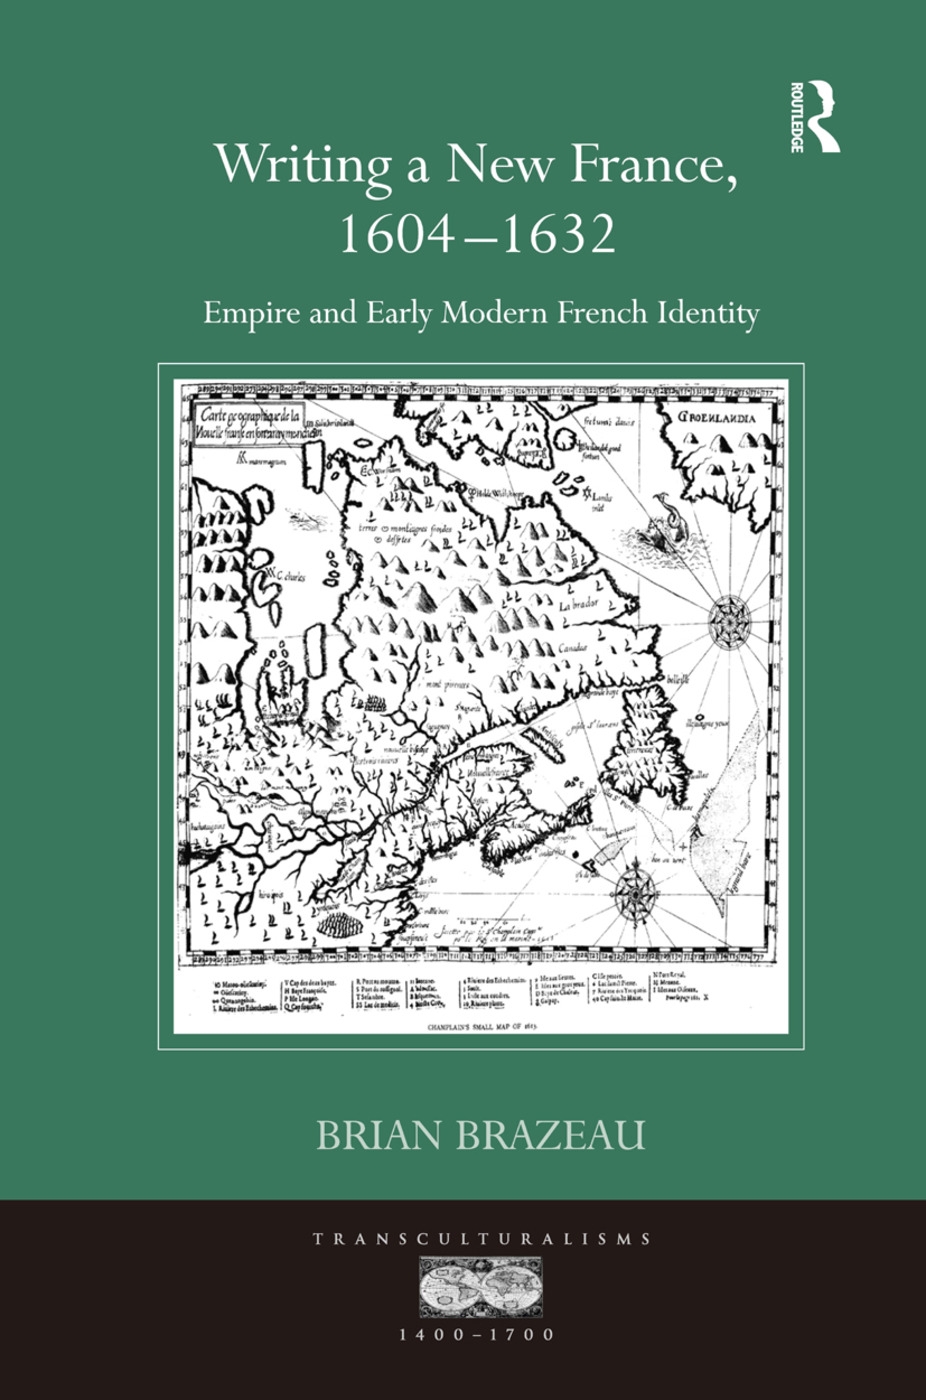 Writing a New France, 1604-1632: Empire and Early Modern French Identity. Brian Brazeau